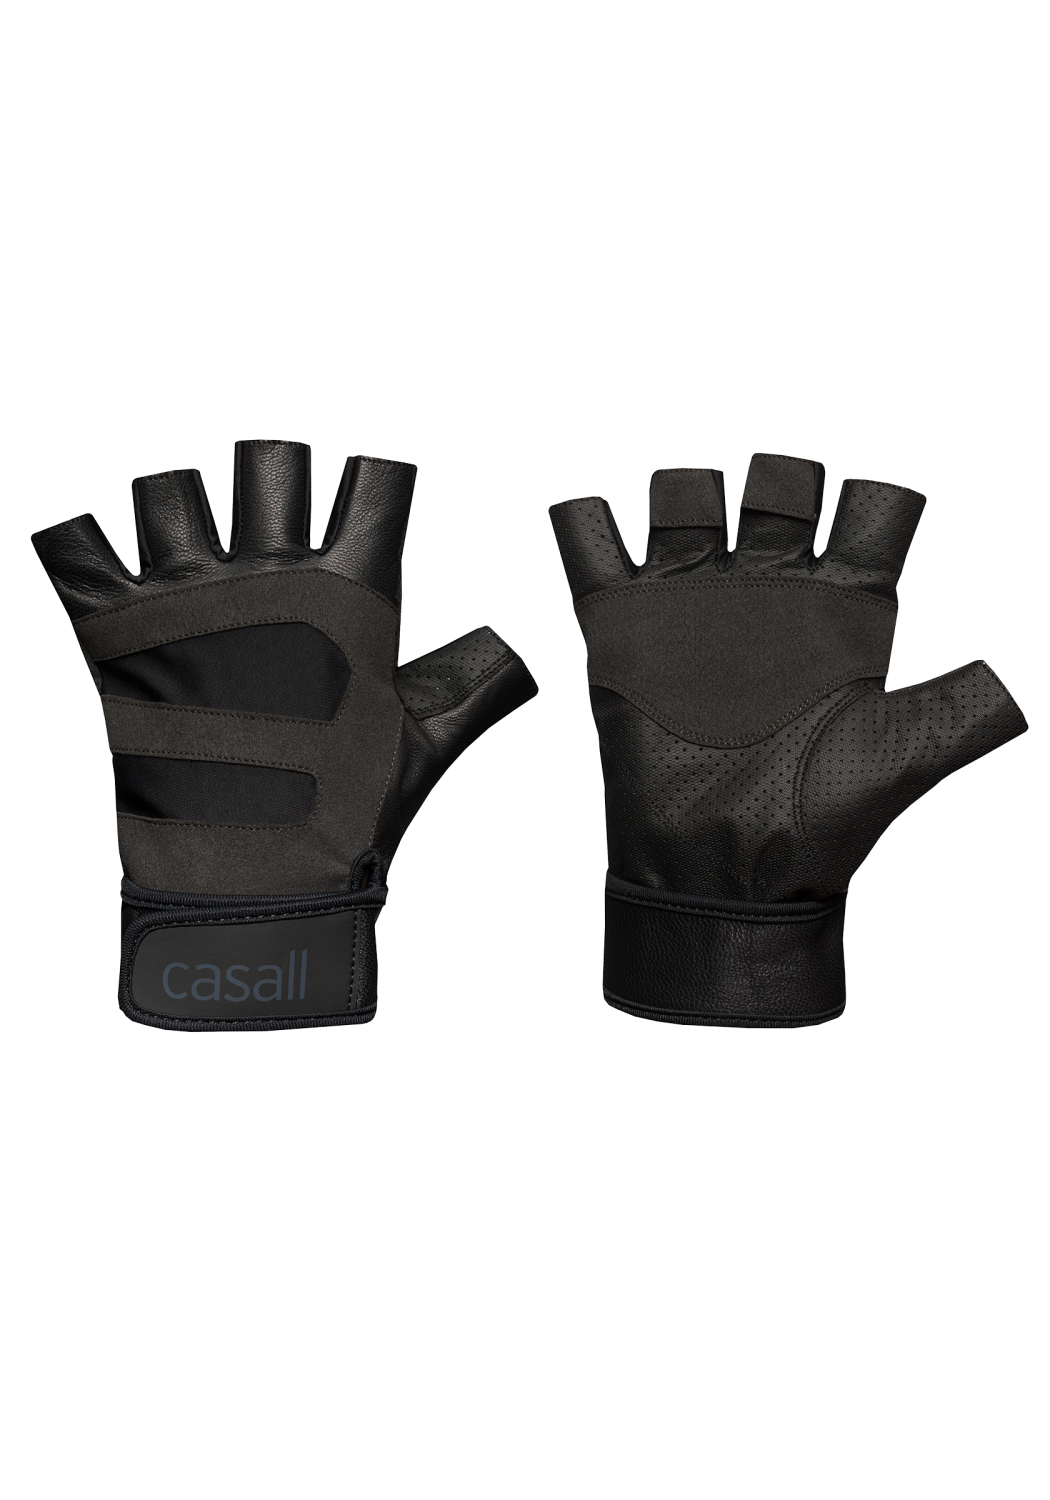 Exercise glove support "Black" - Casall